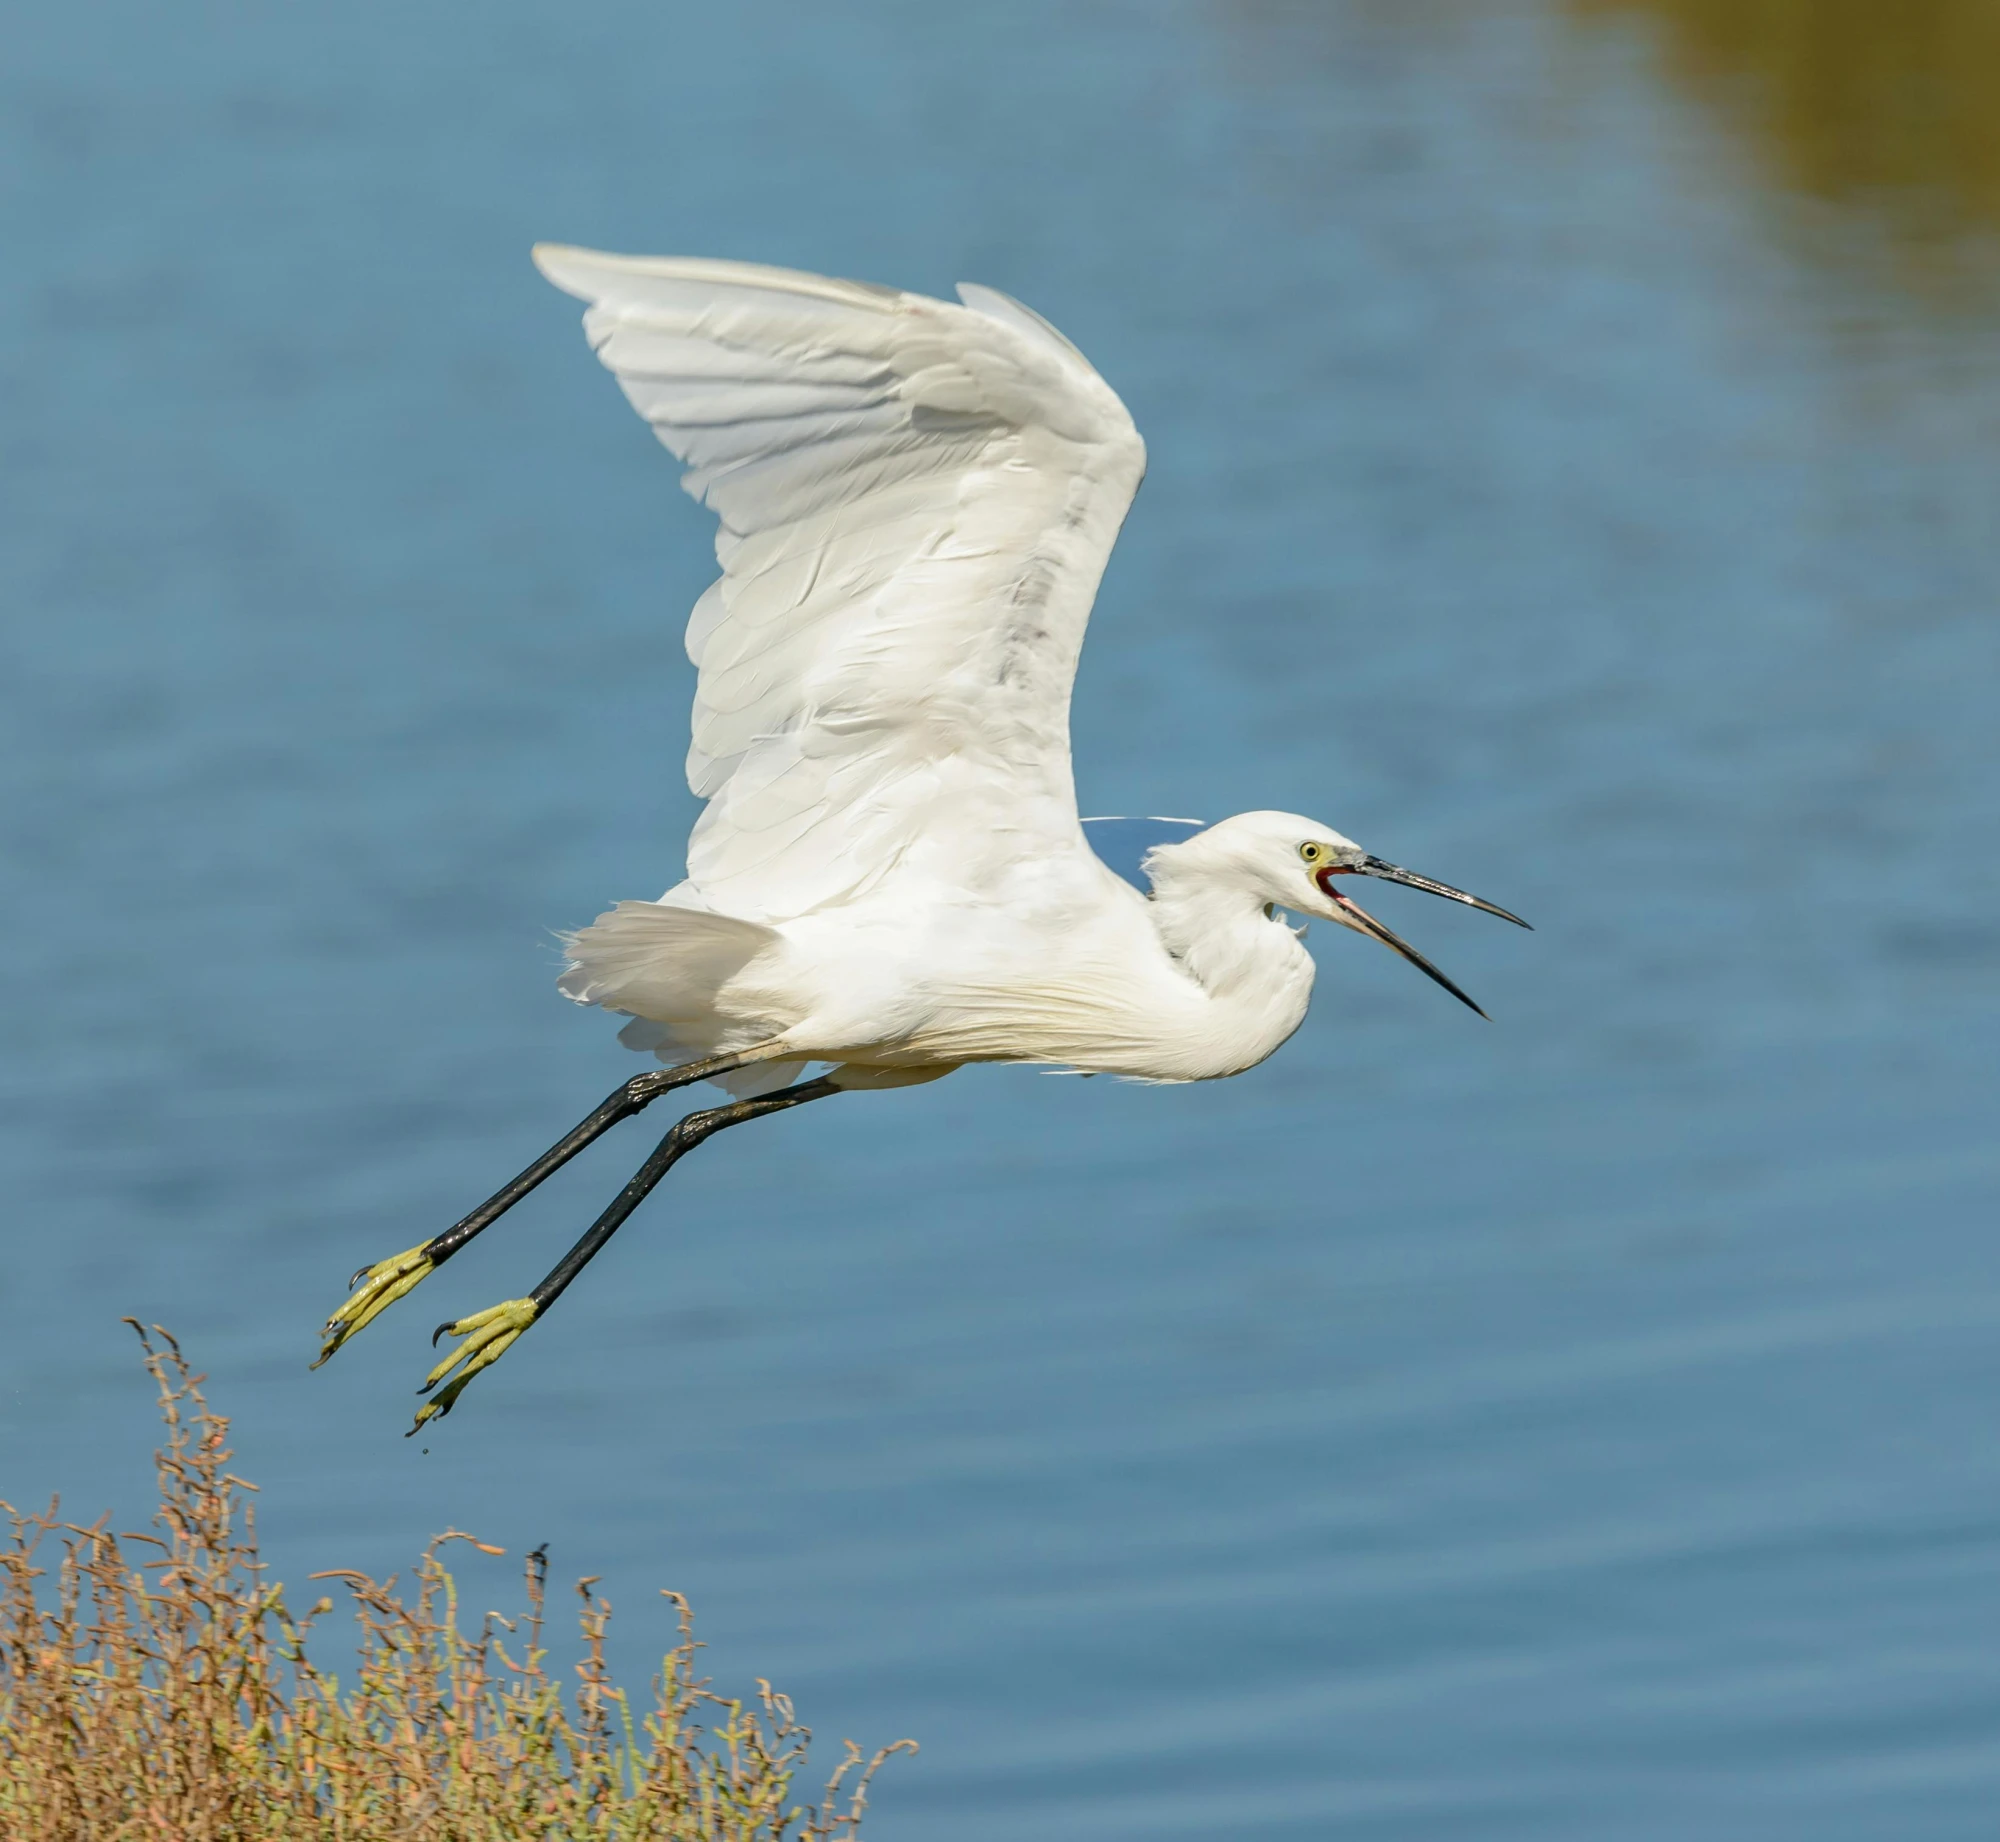 a white bird with long legs flying near water